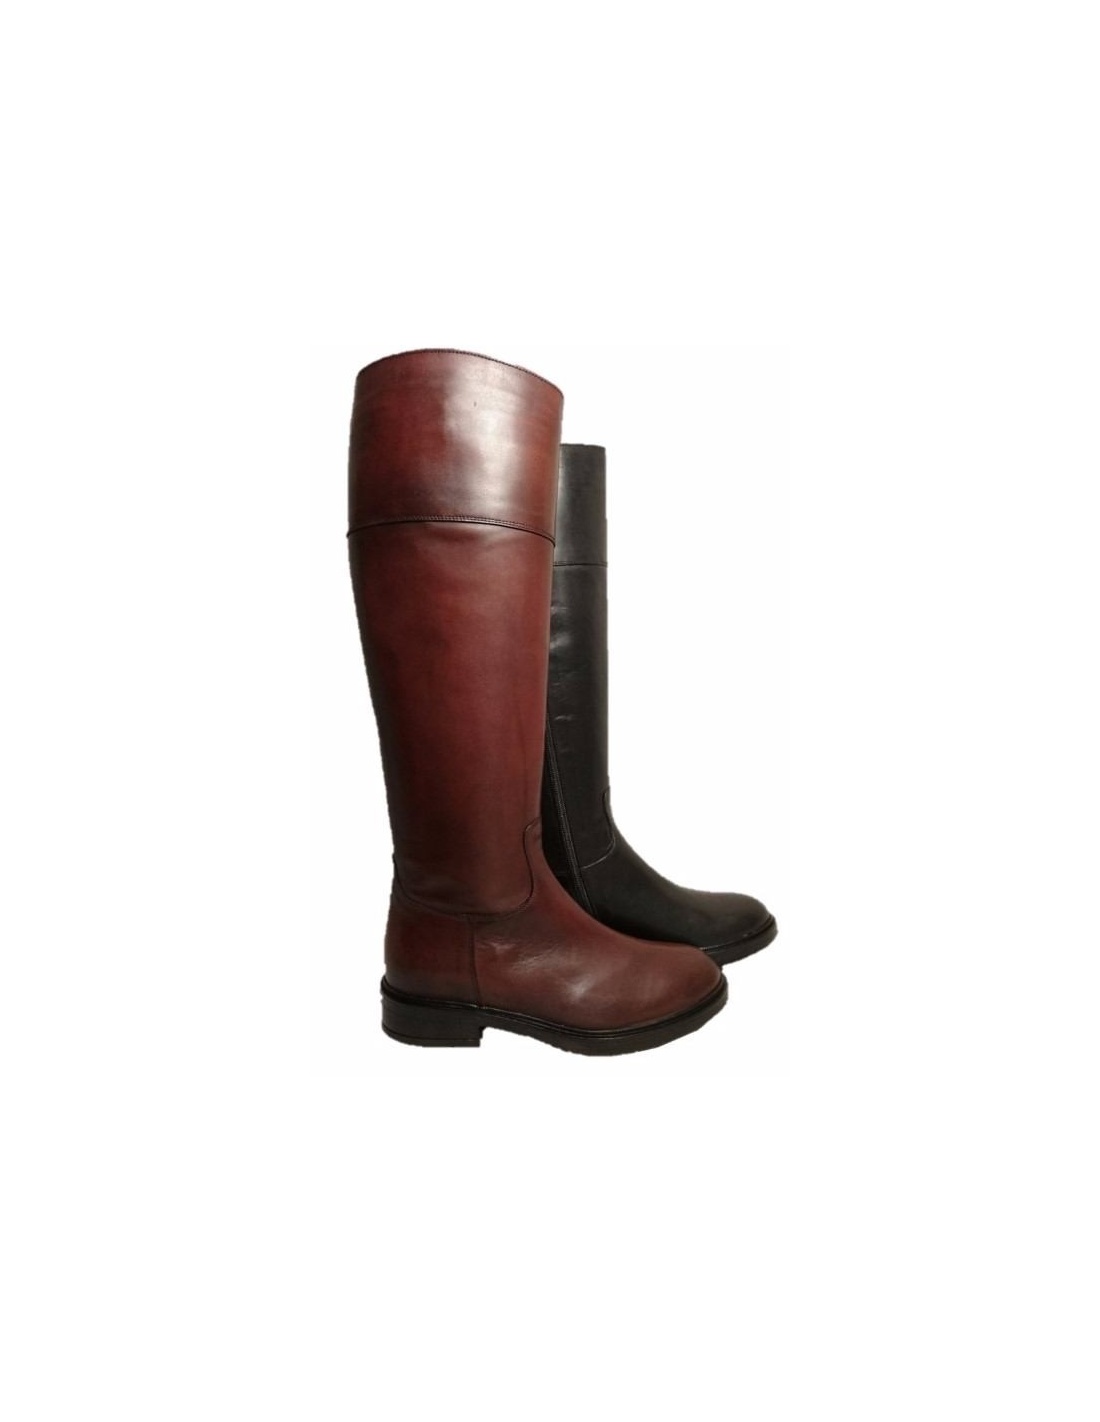 Italian leather riding boots for ladies 